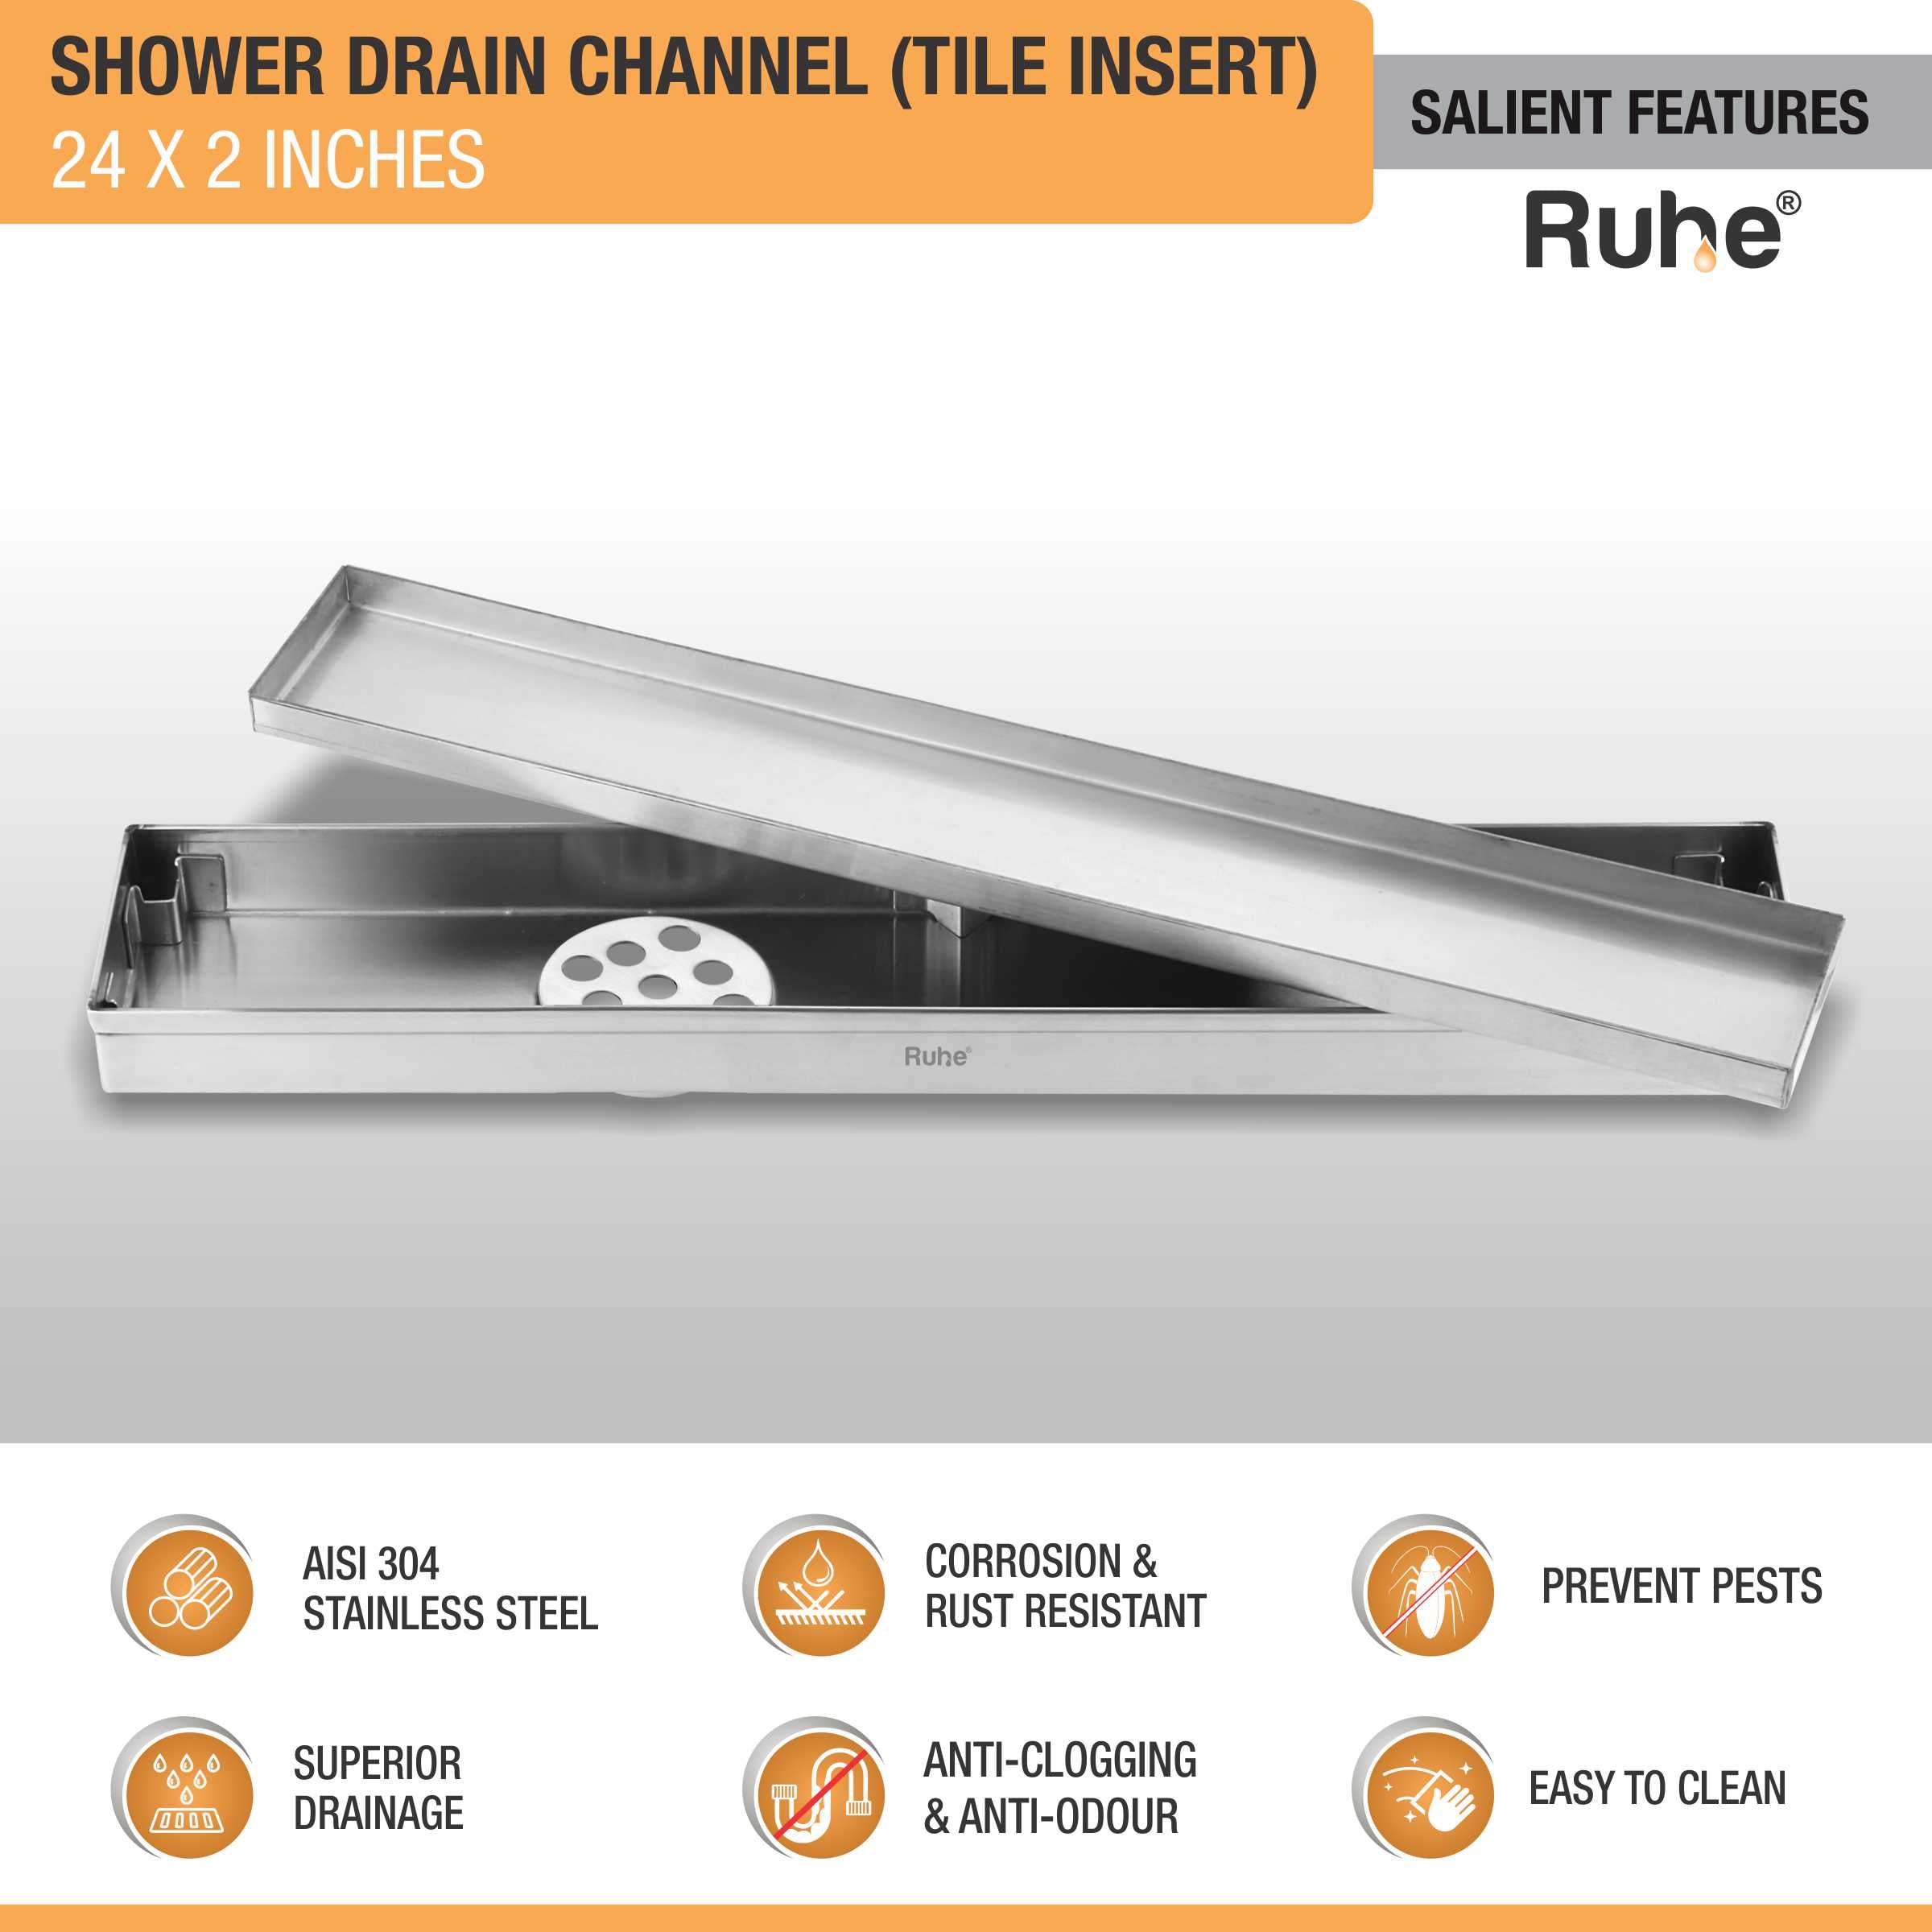 Tile Insert Shower Drain Channel (24 x 2 Inches) (304 Grade) features